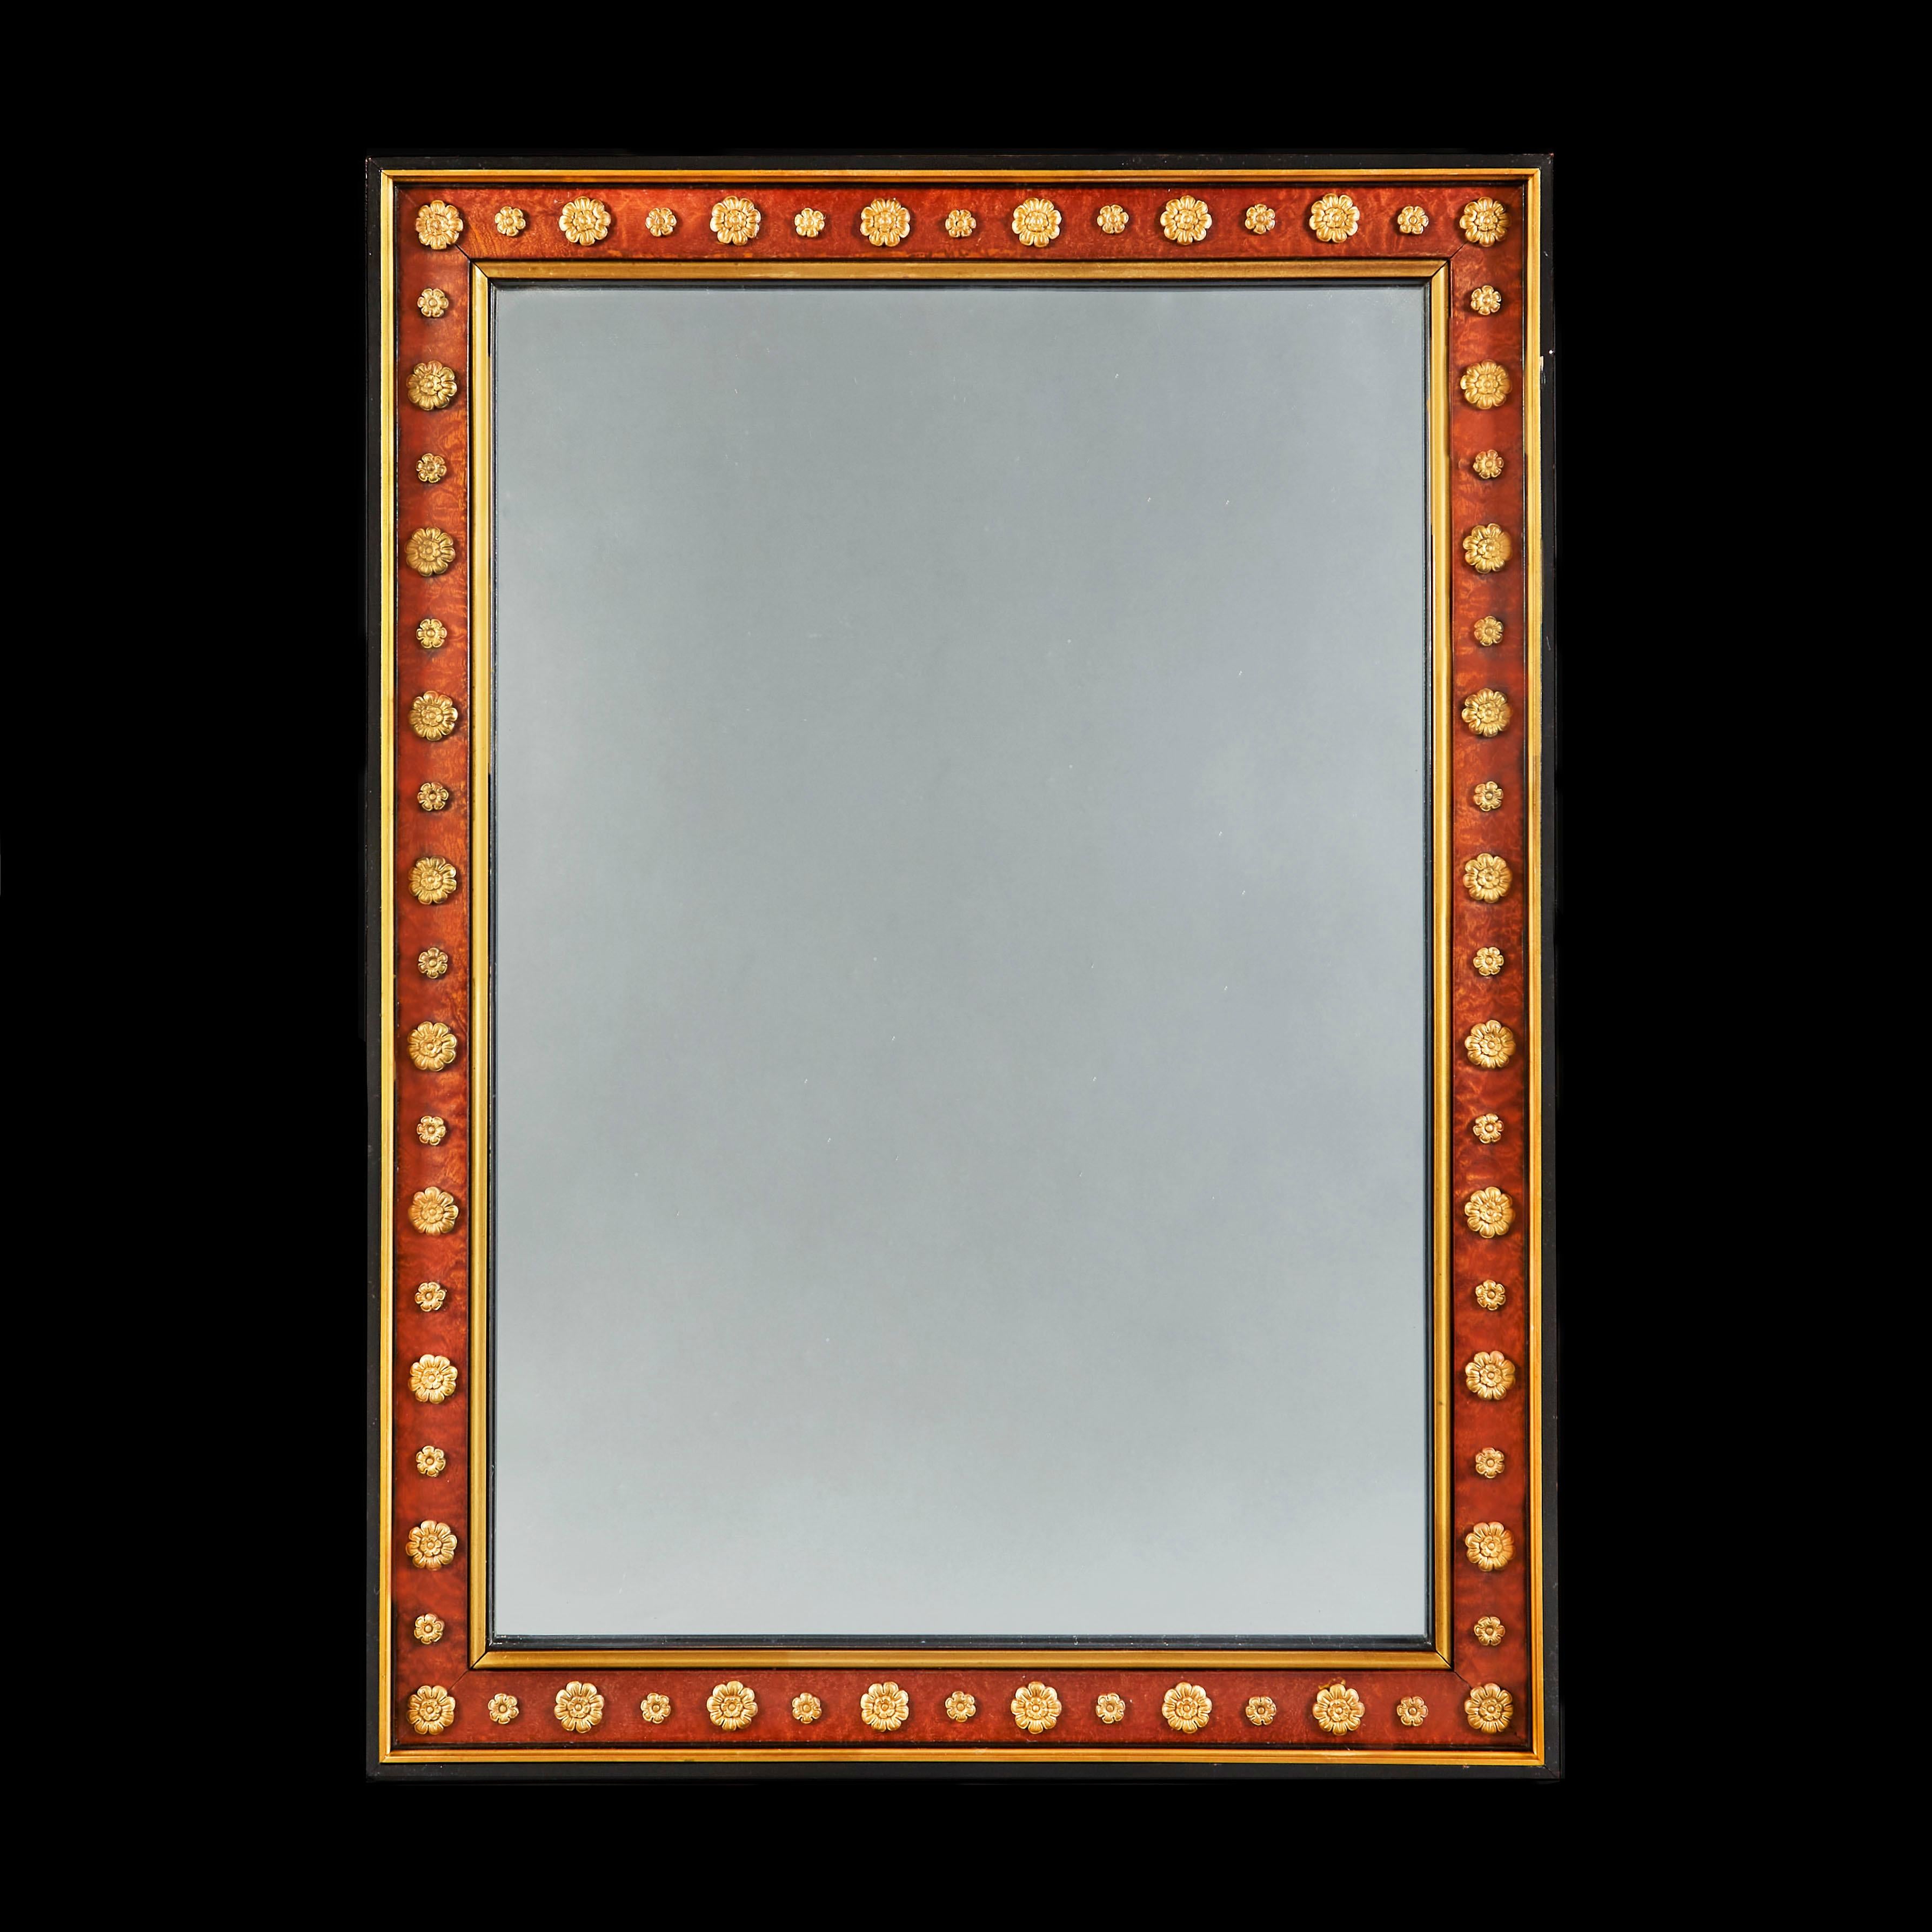 A fine nineteenth century Russian mirror, with burr wood border decorated with ormolu paterae, all set within an ebonised frame.